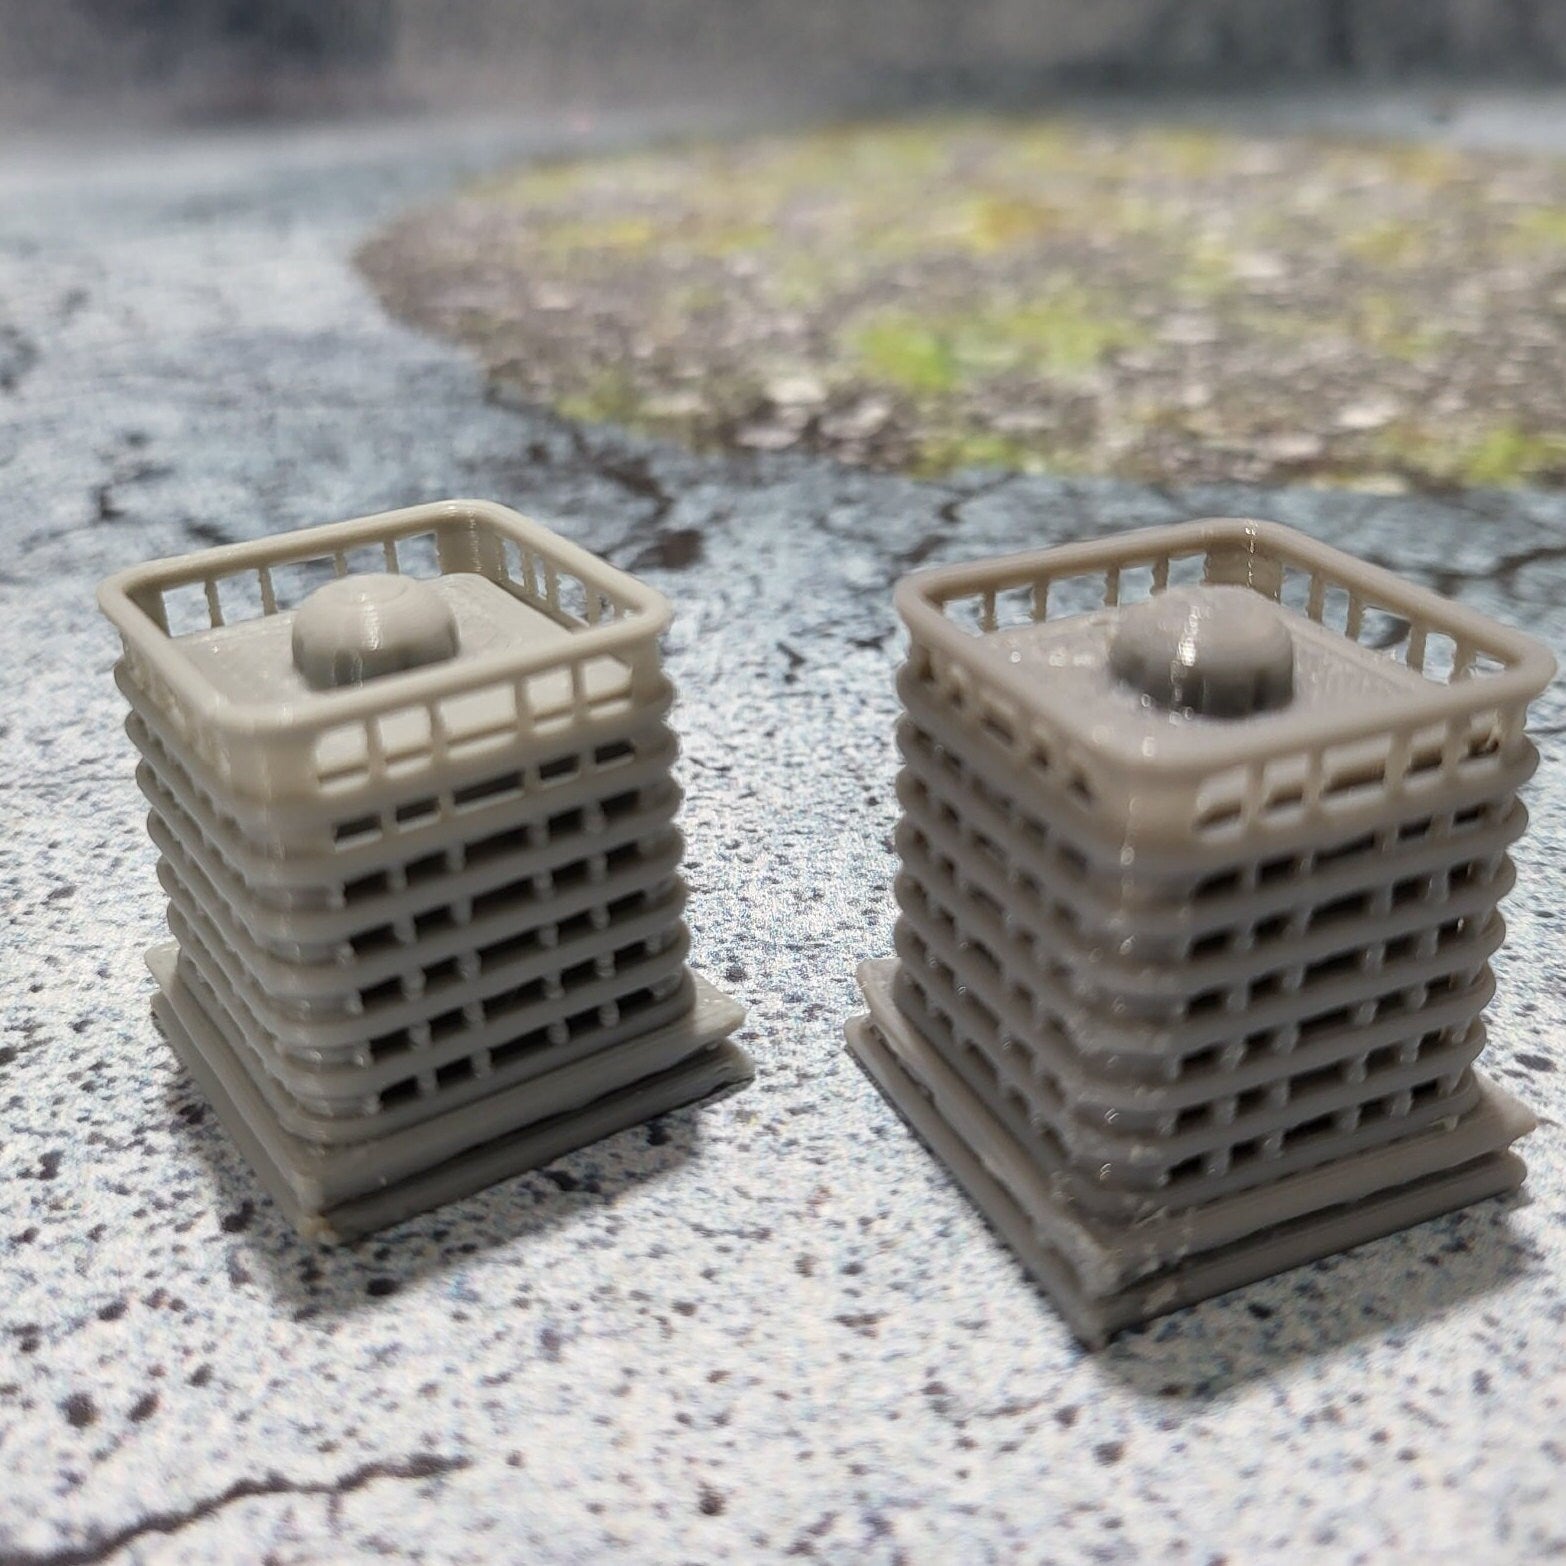 Pair of Totes in Cages, Water/Chemical Cages